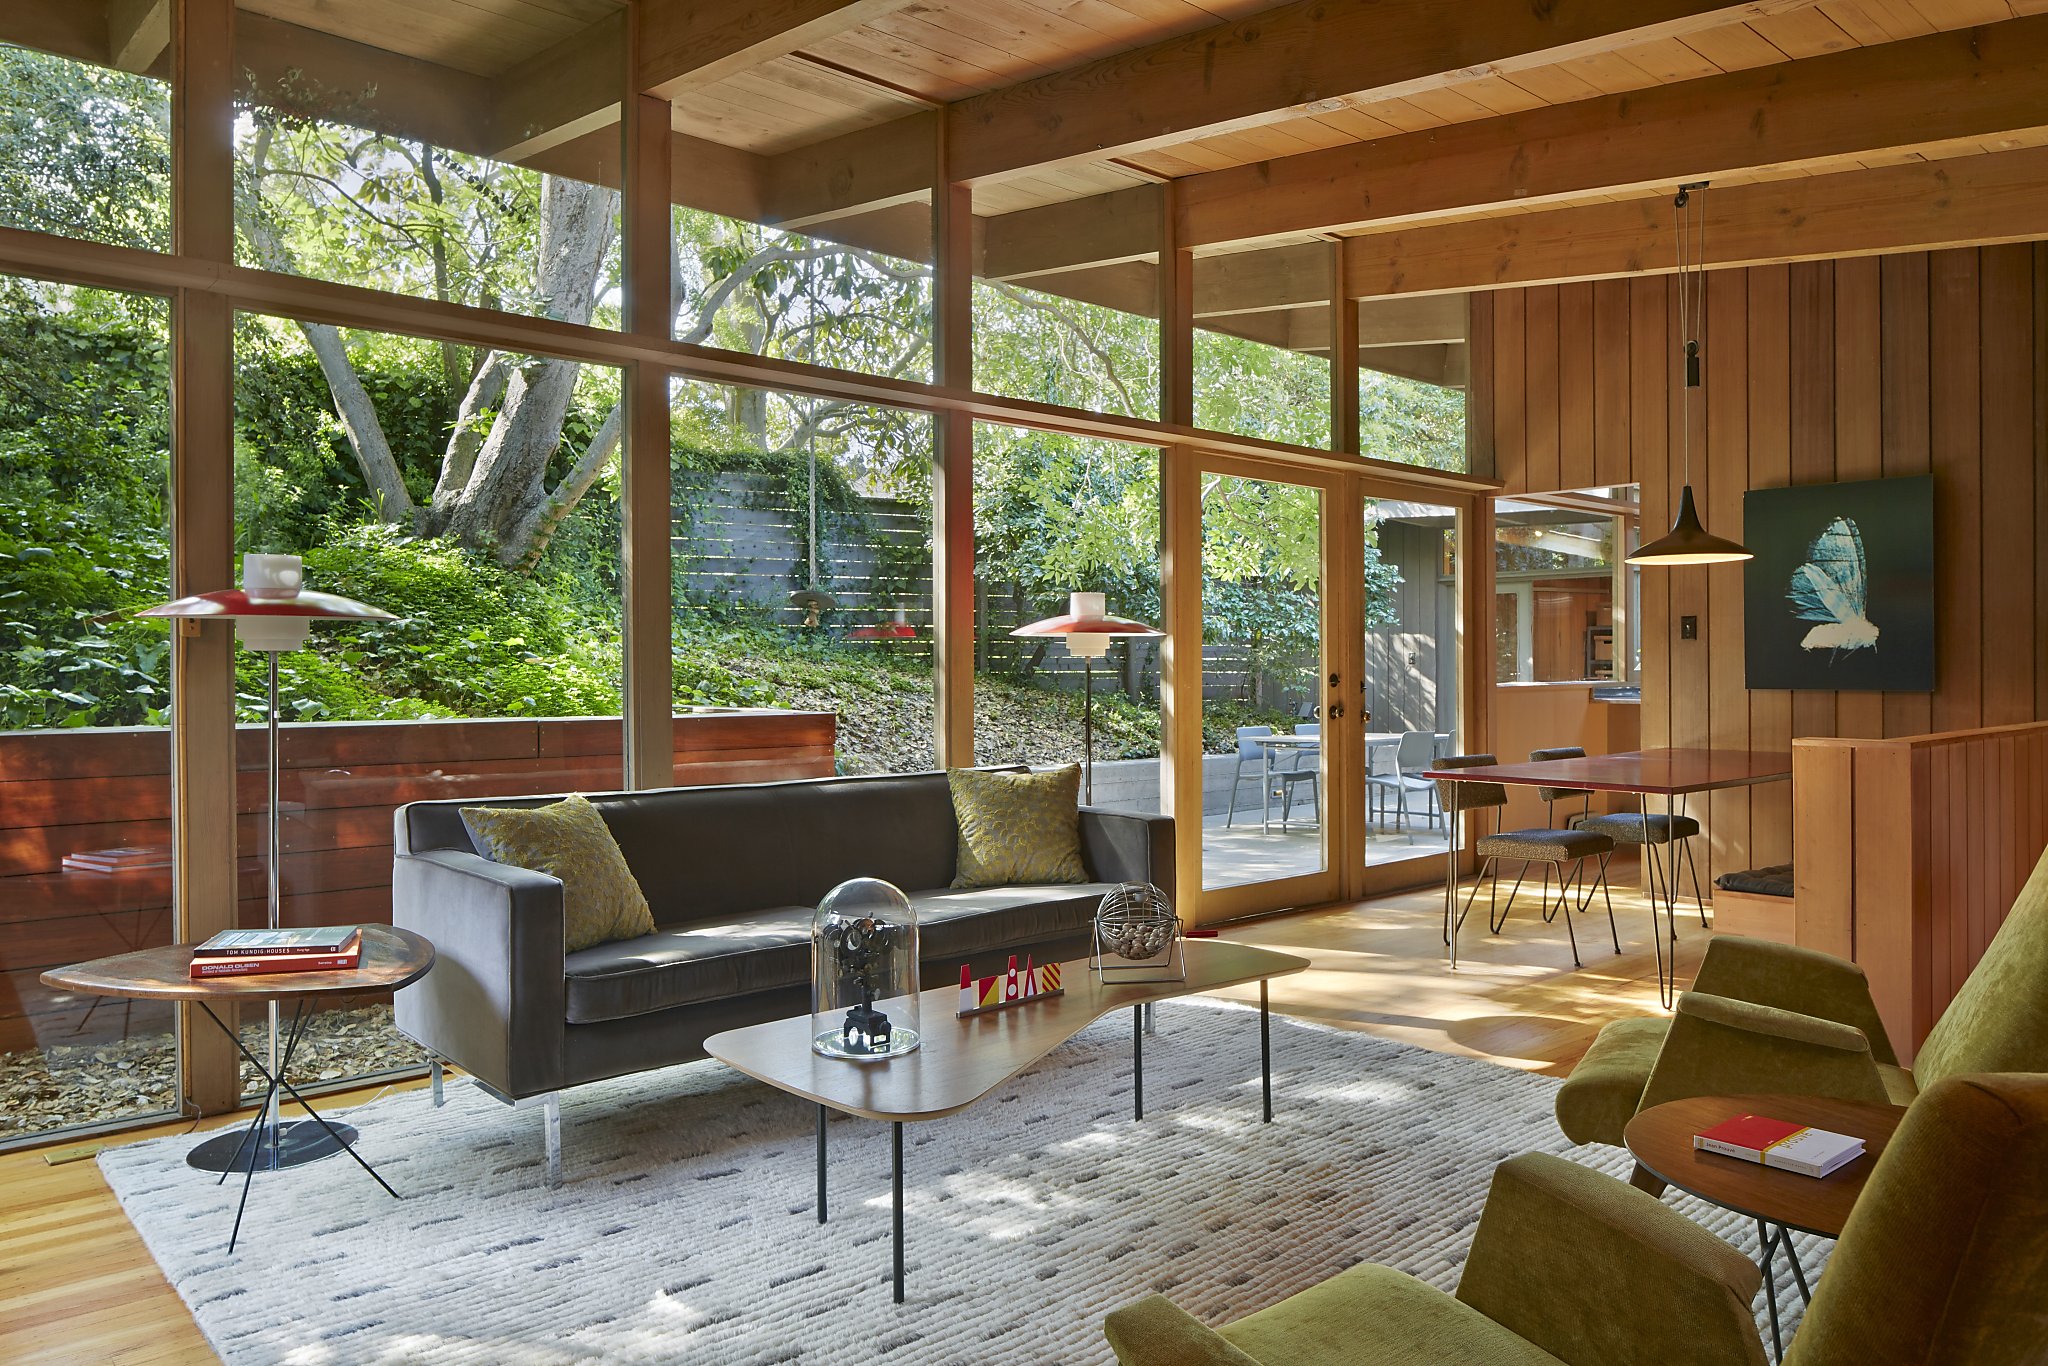 Home tour illustrates how architects, designers live